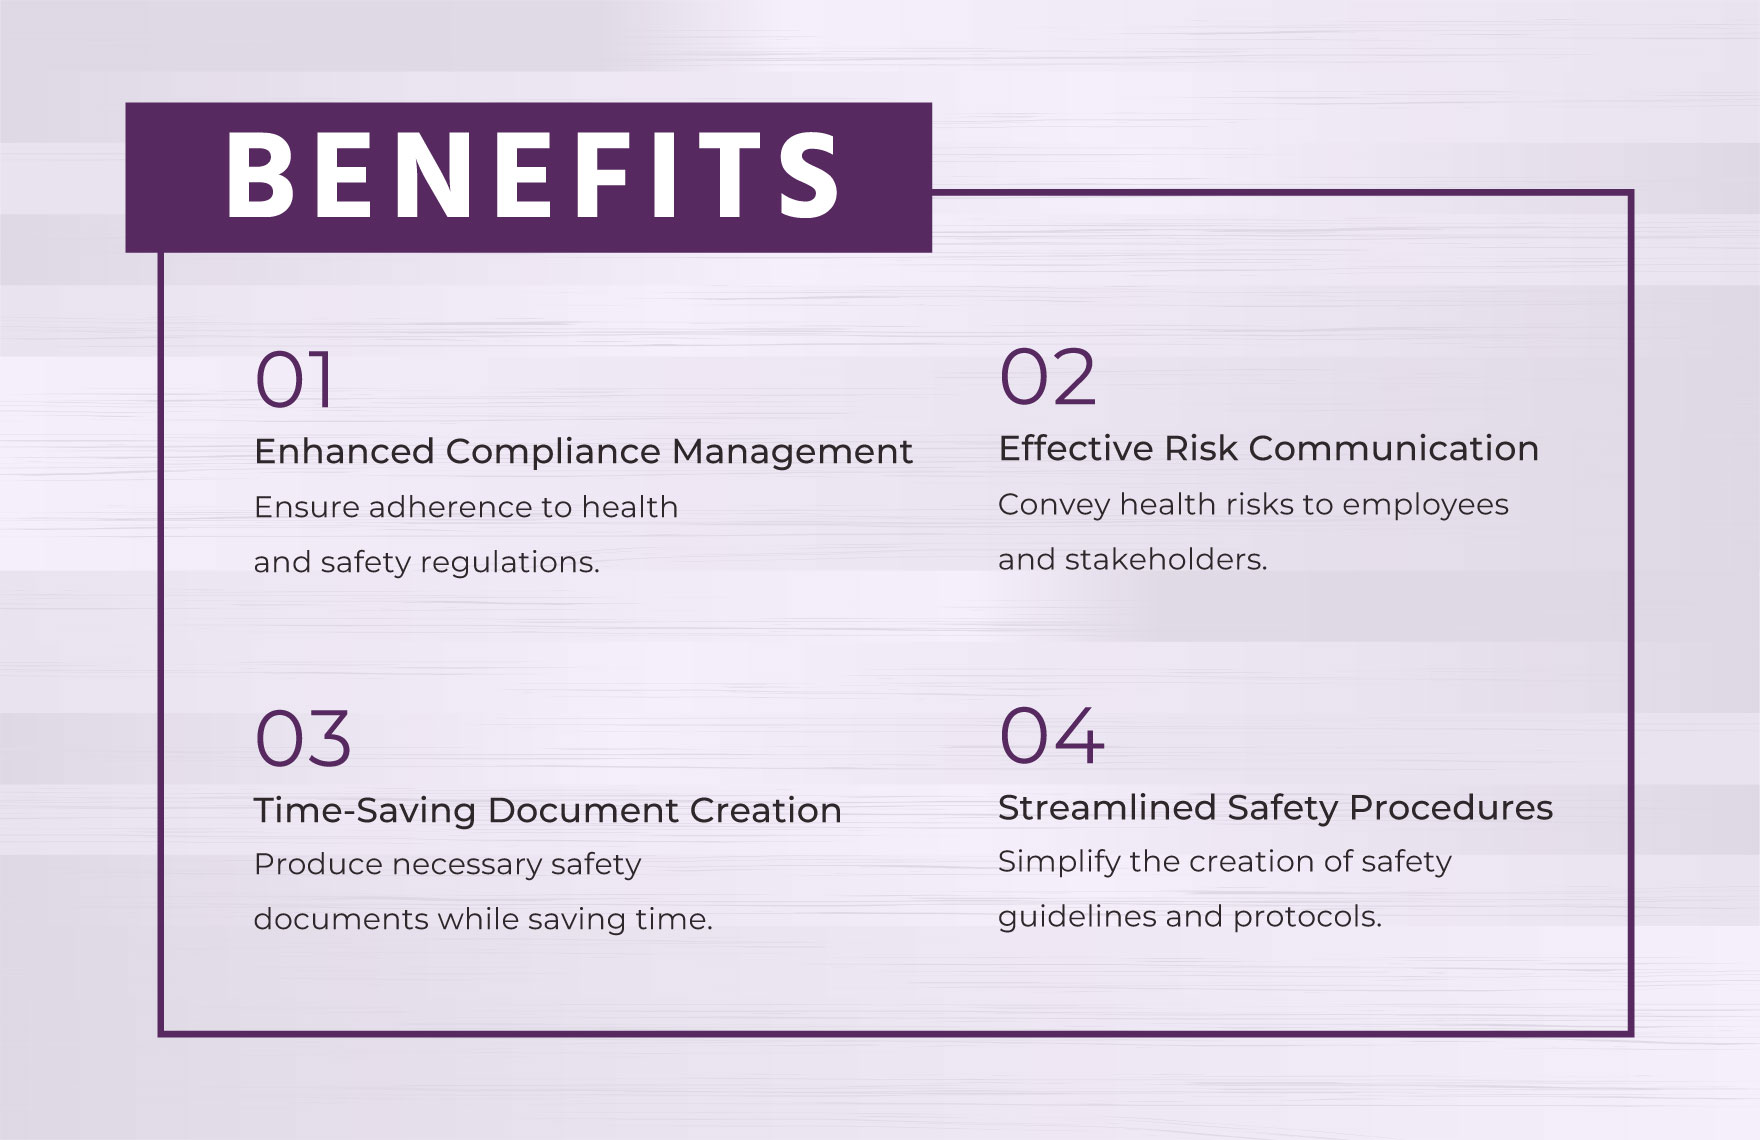 Workplace Safety Management Journal Template